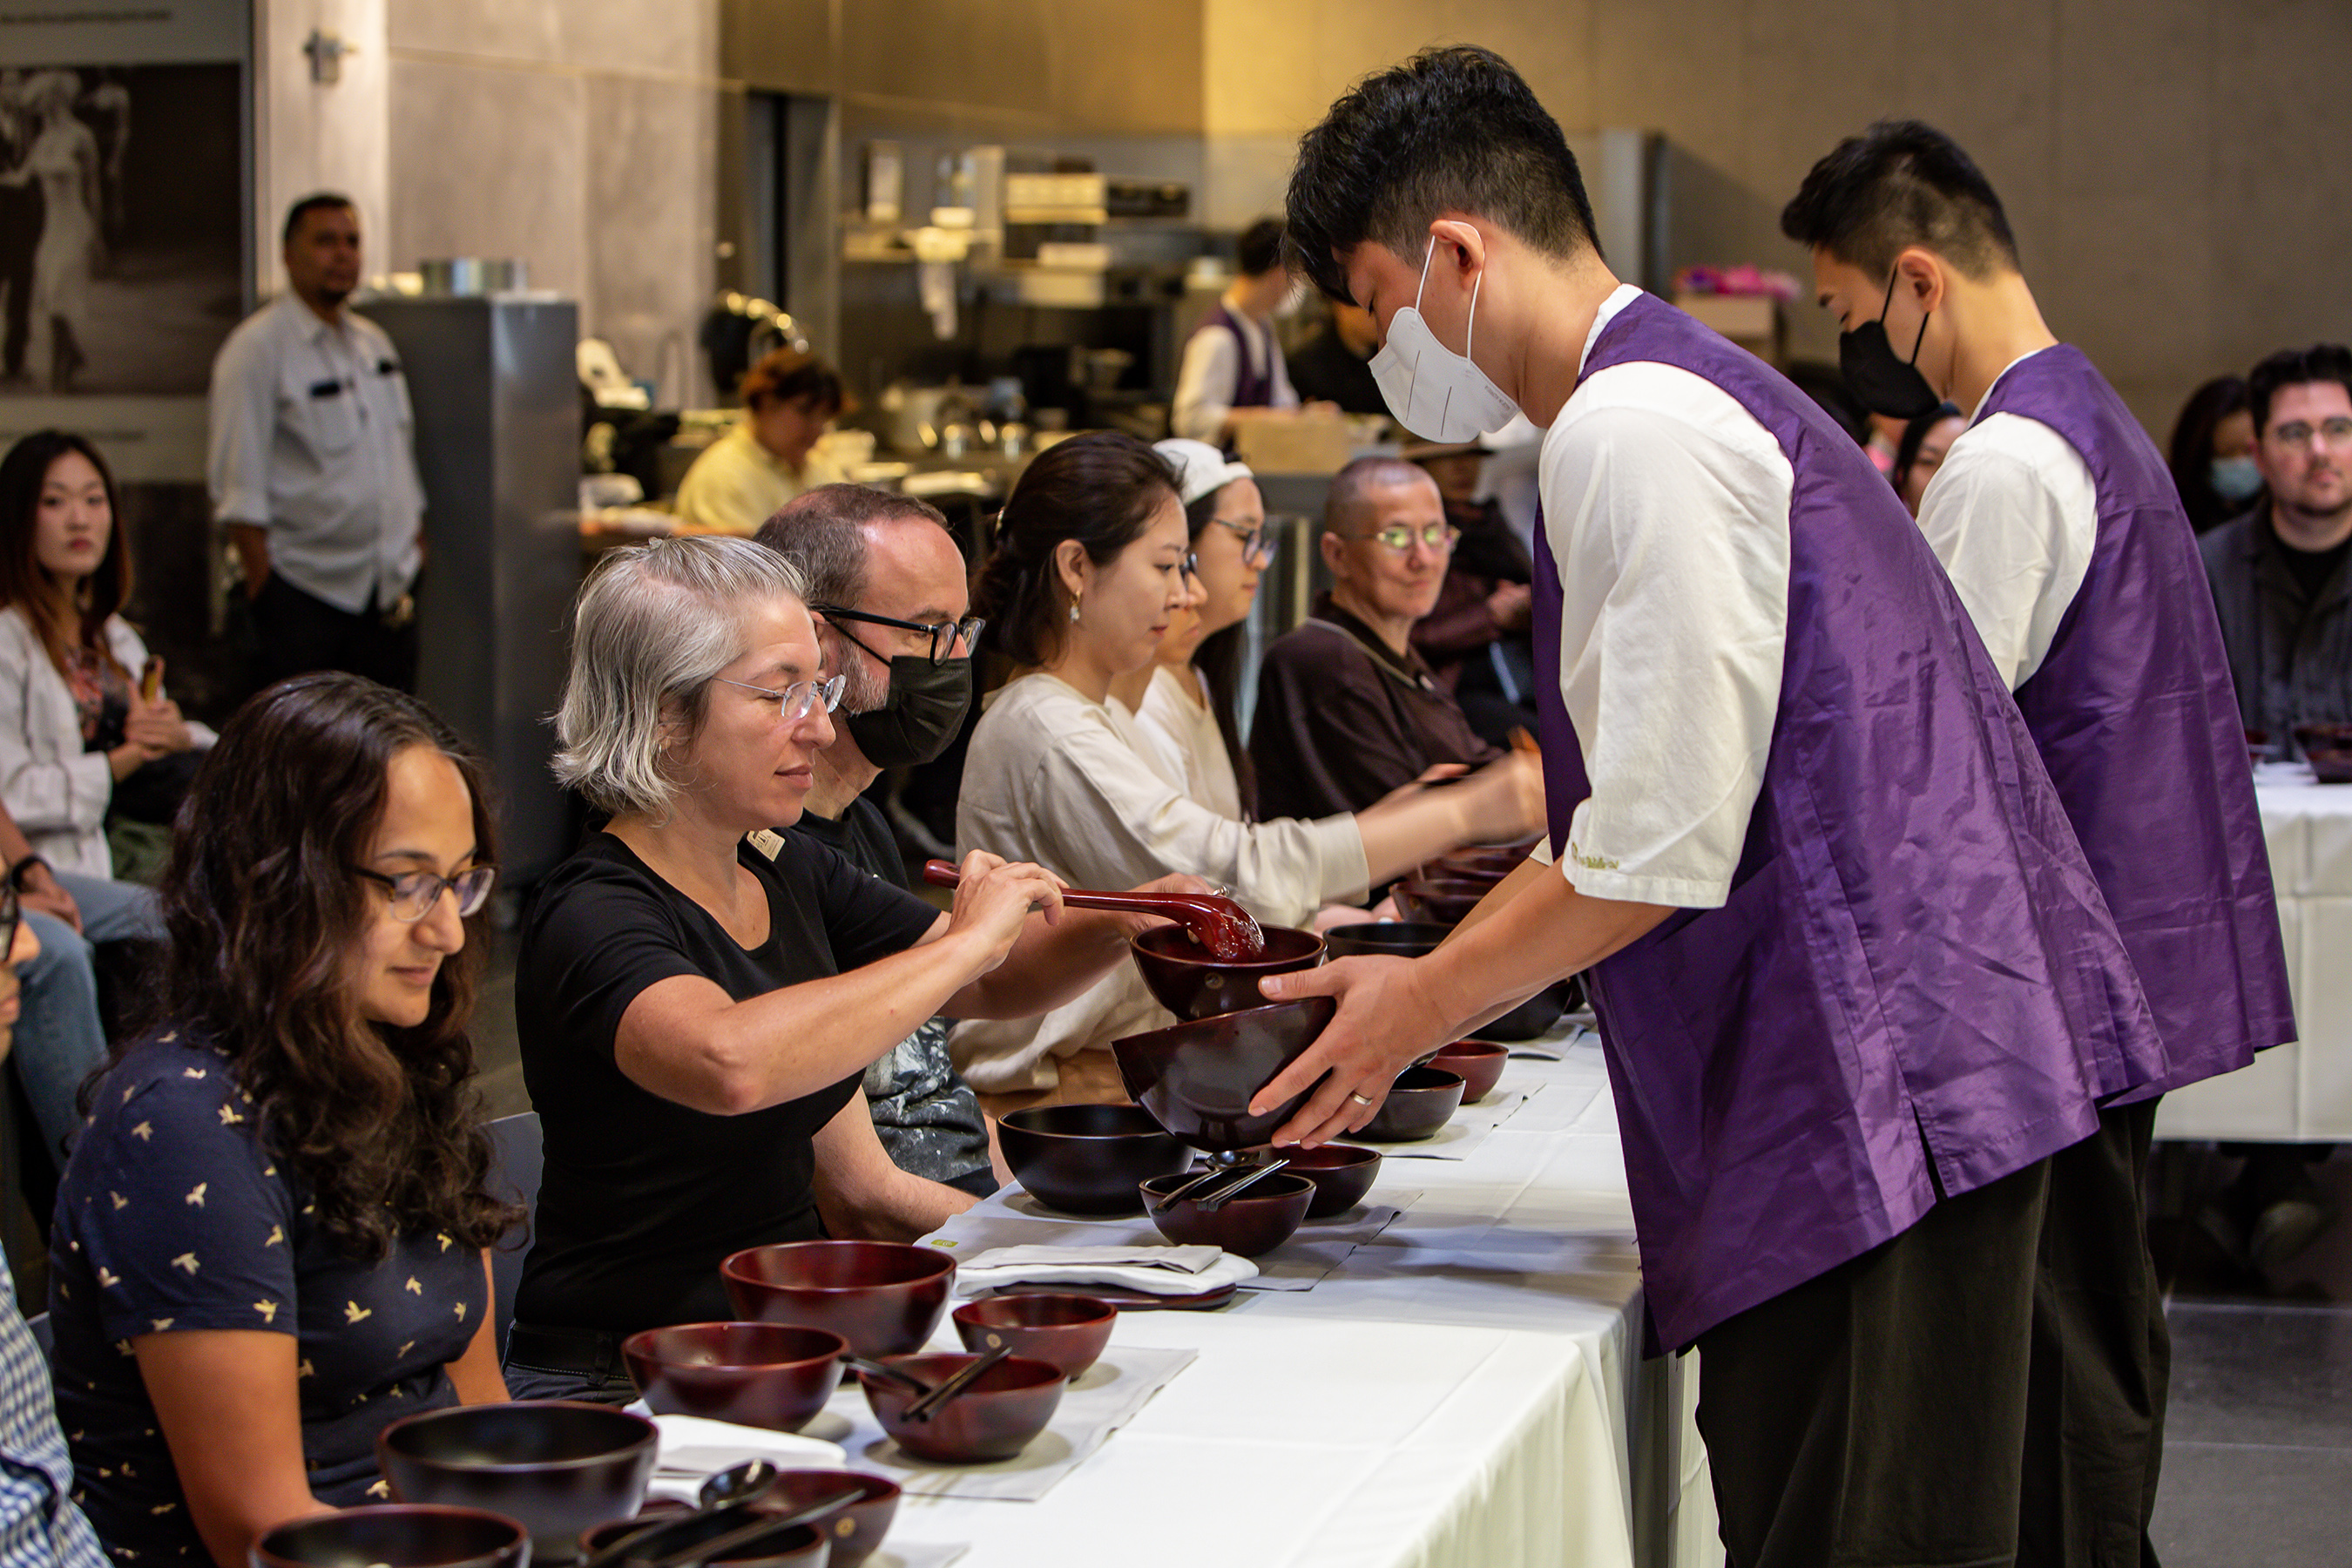 Netflix series Chef's Table, had a Barugongyang workshop at “Meeting with Korean Buddhism” held in New York City in August 2022